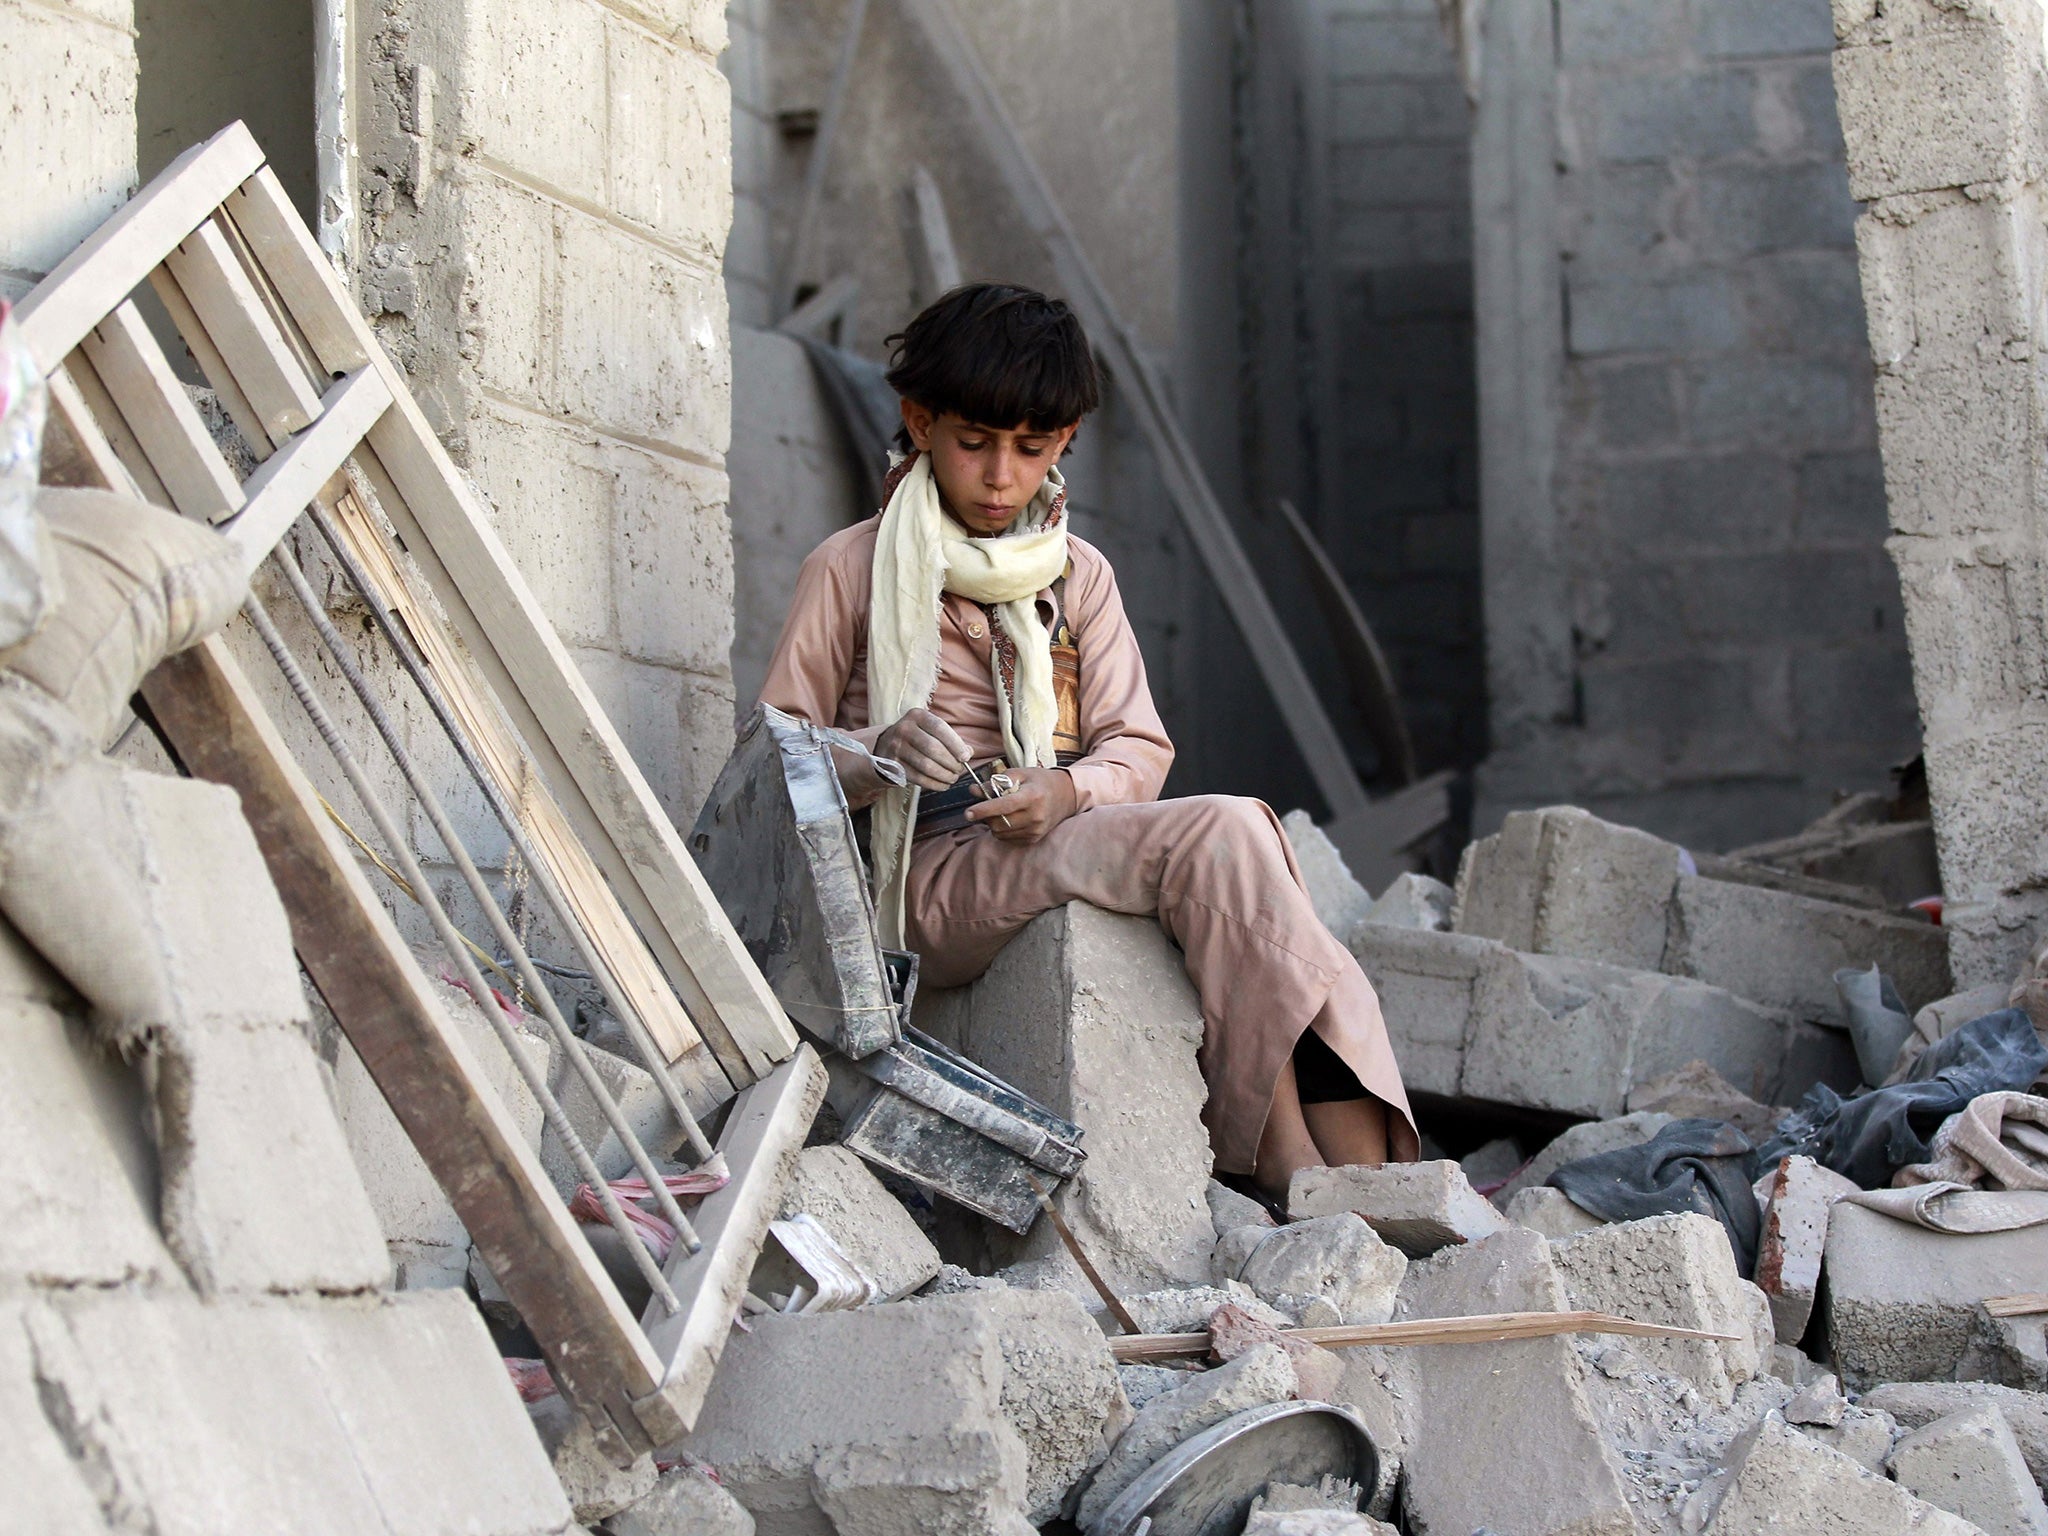 A Yemeni boys sits on the rubble of houses destroyed by an overnight Saudi-led air strike on a residential area in Yemen’s capital, Sana